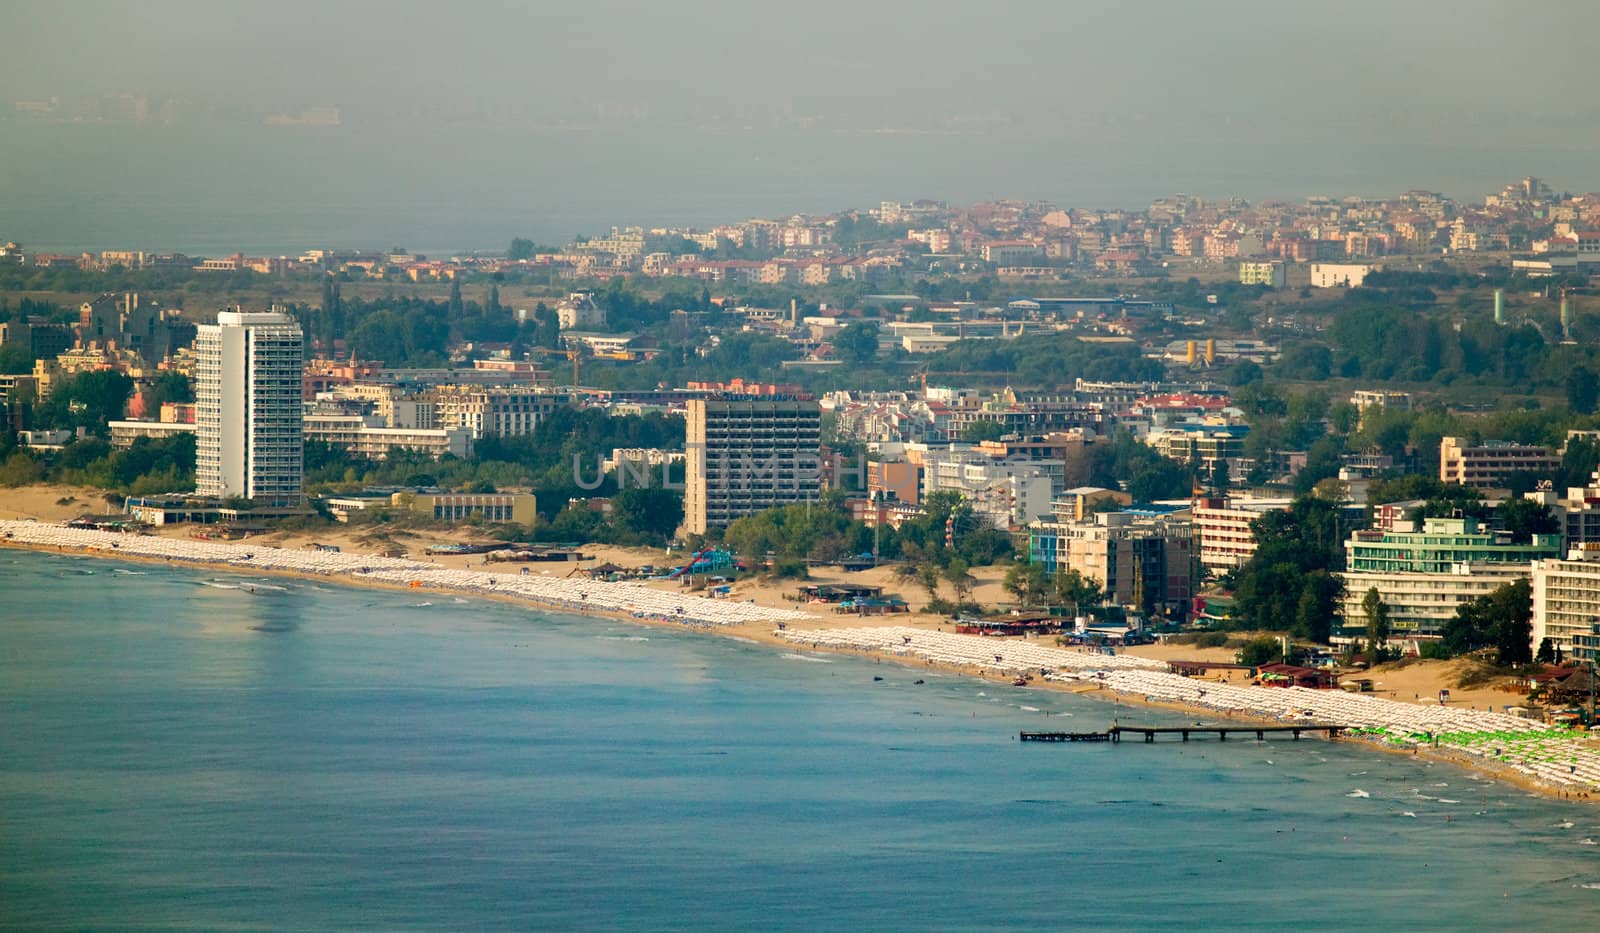 Overview on the Sunny beach holiday resort, Bulgaria